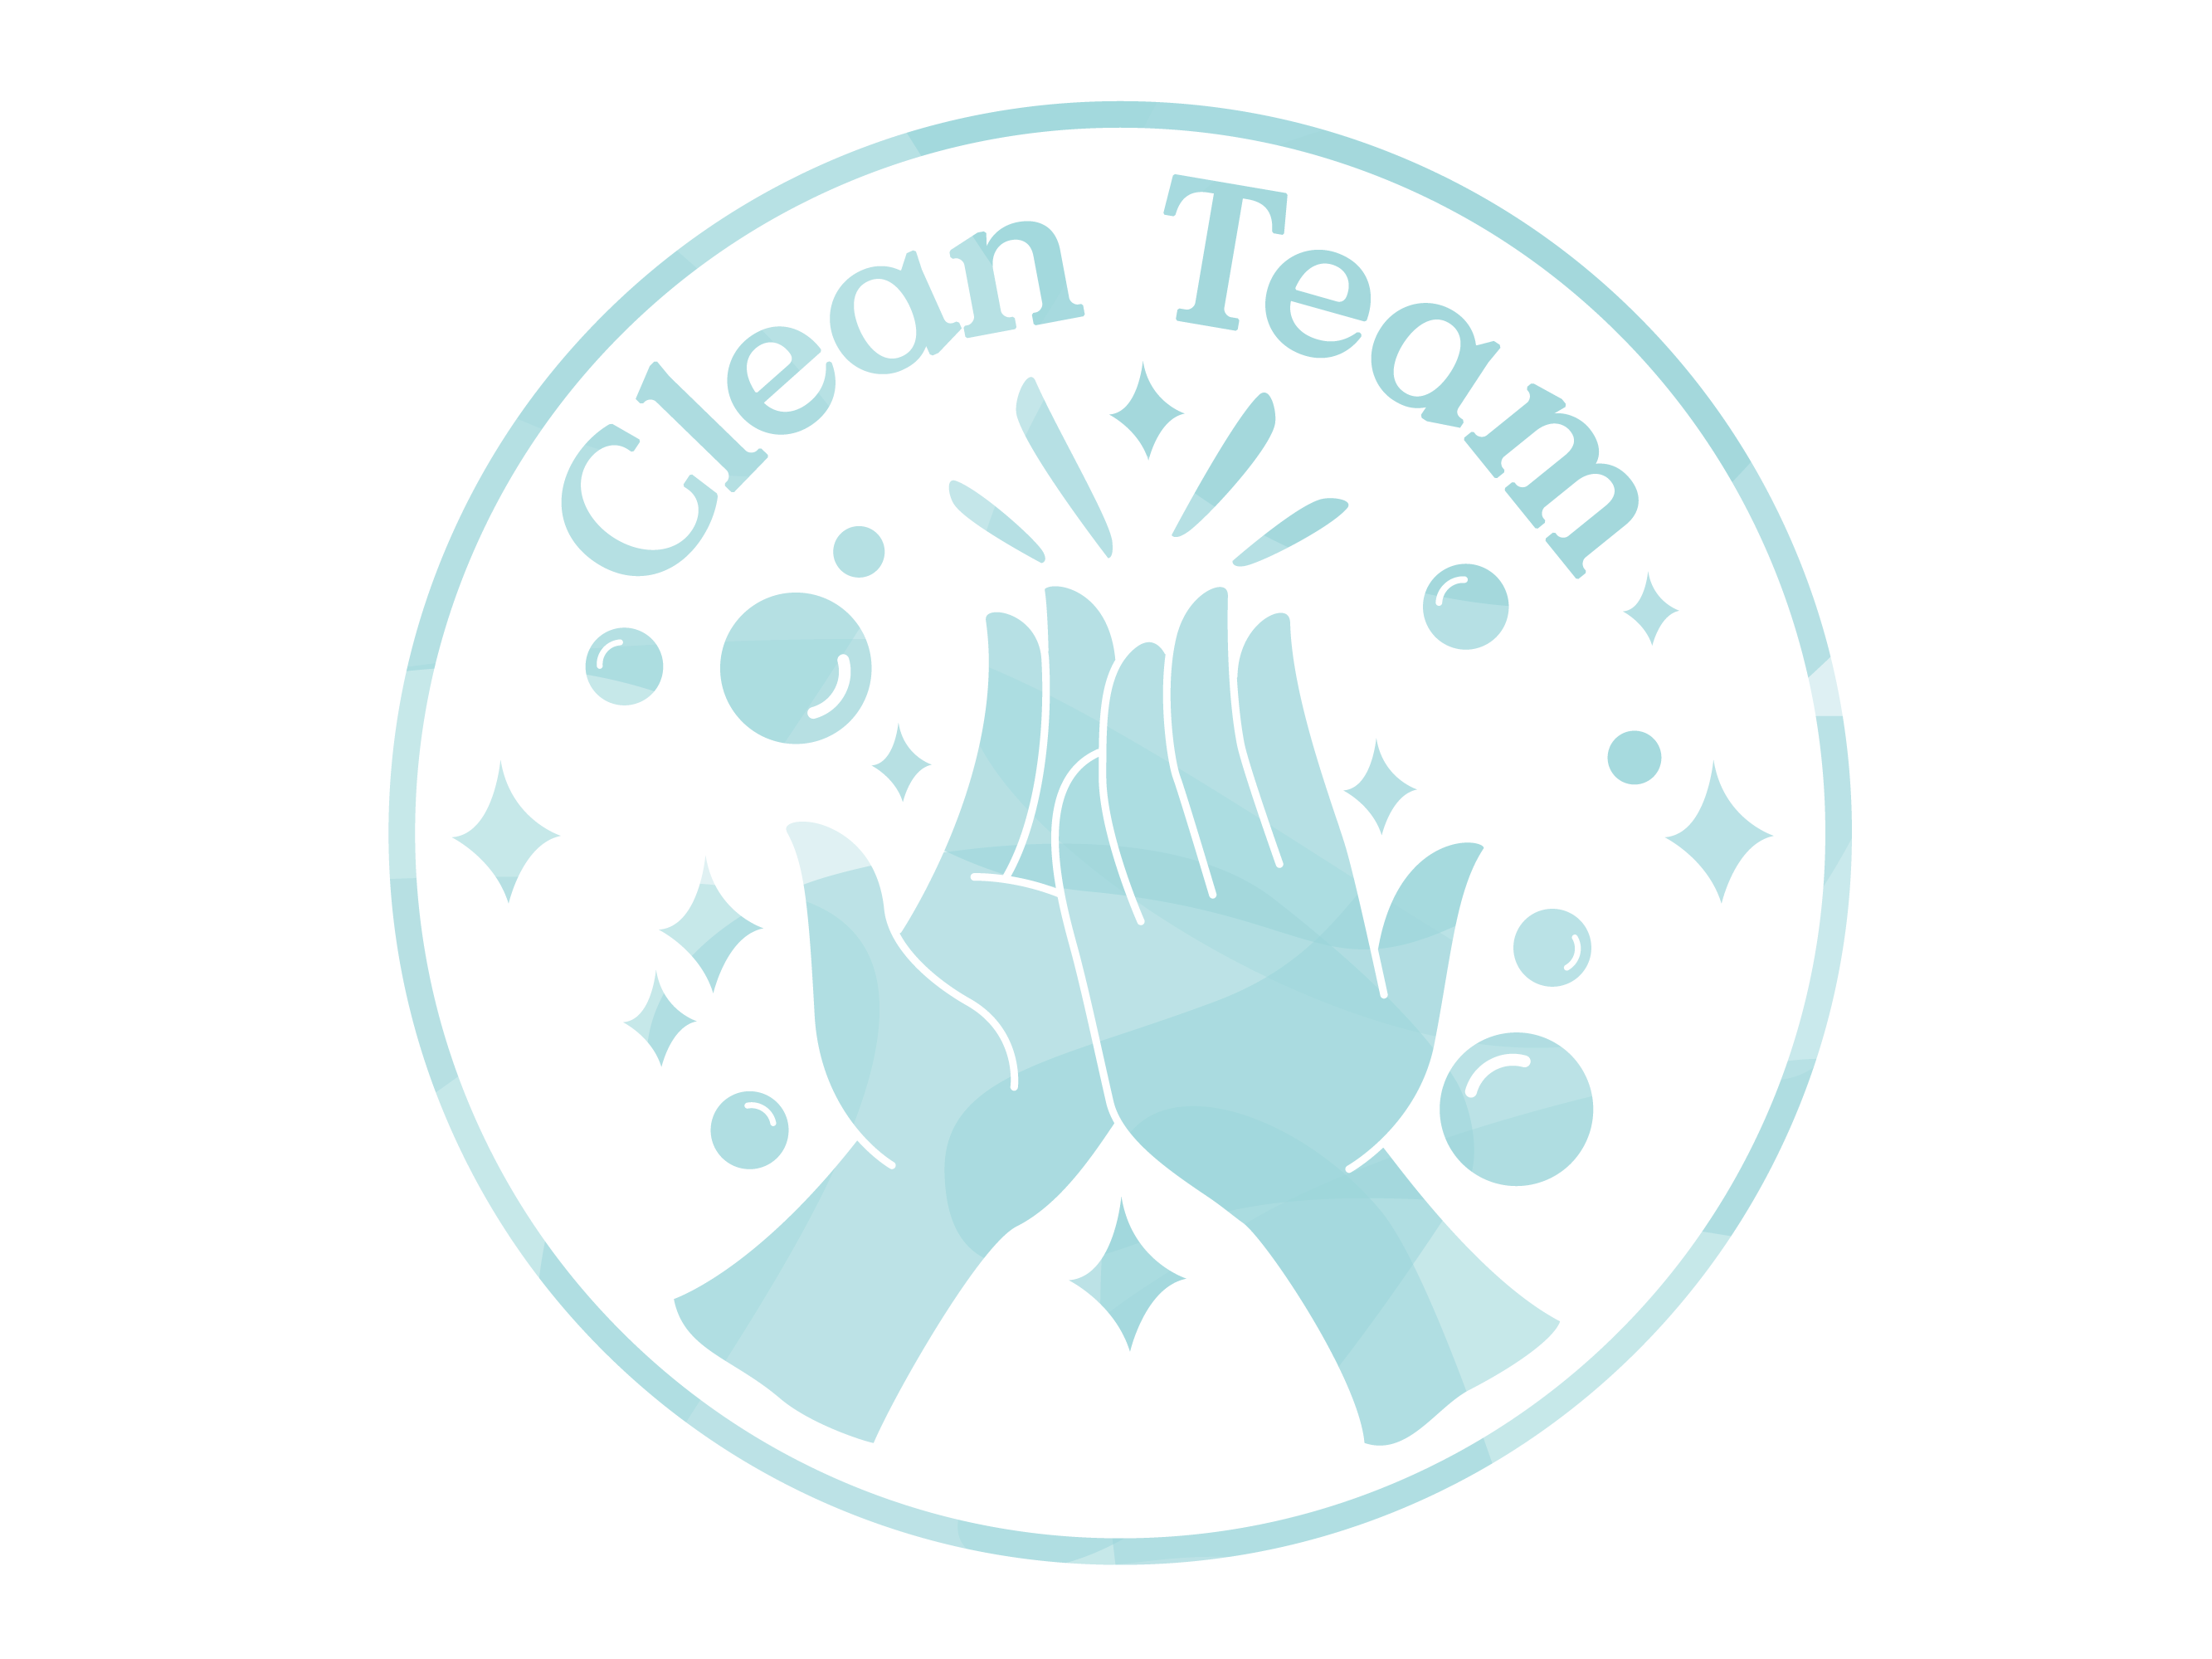 Clean Team logo illustration of washing two hands